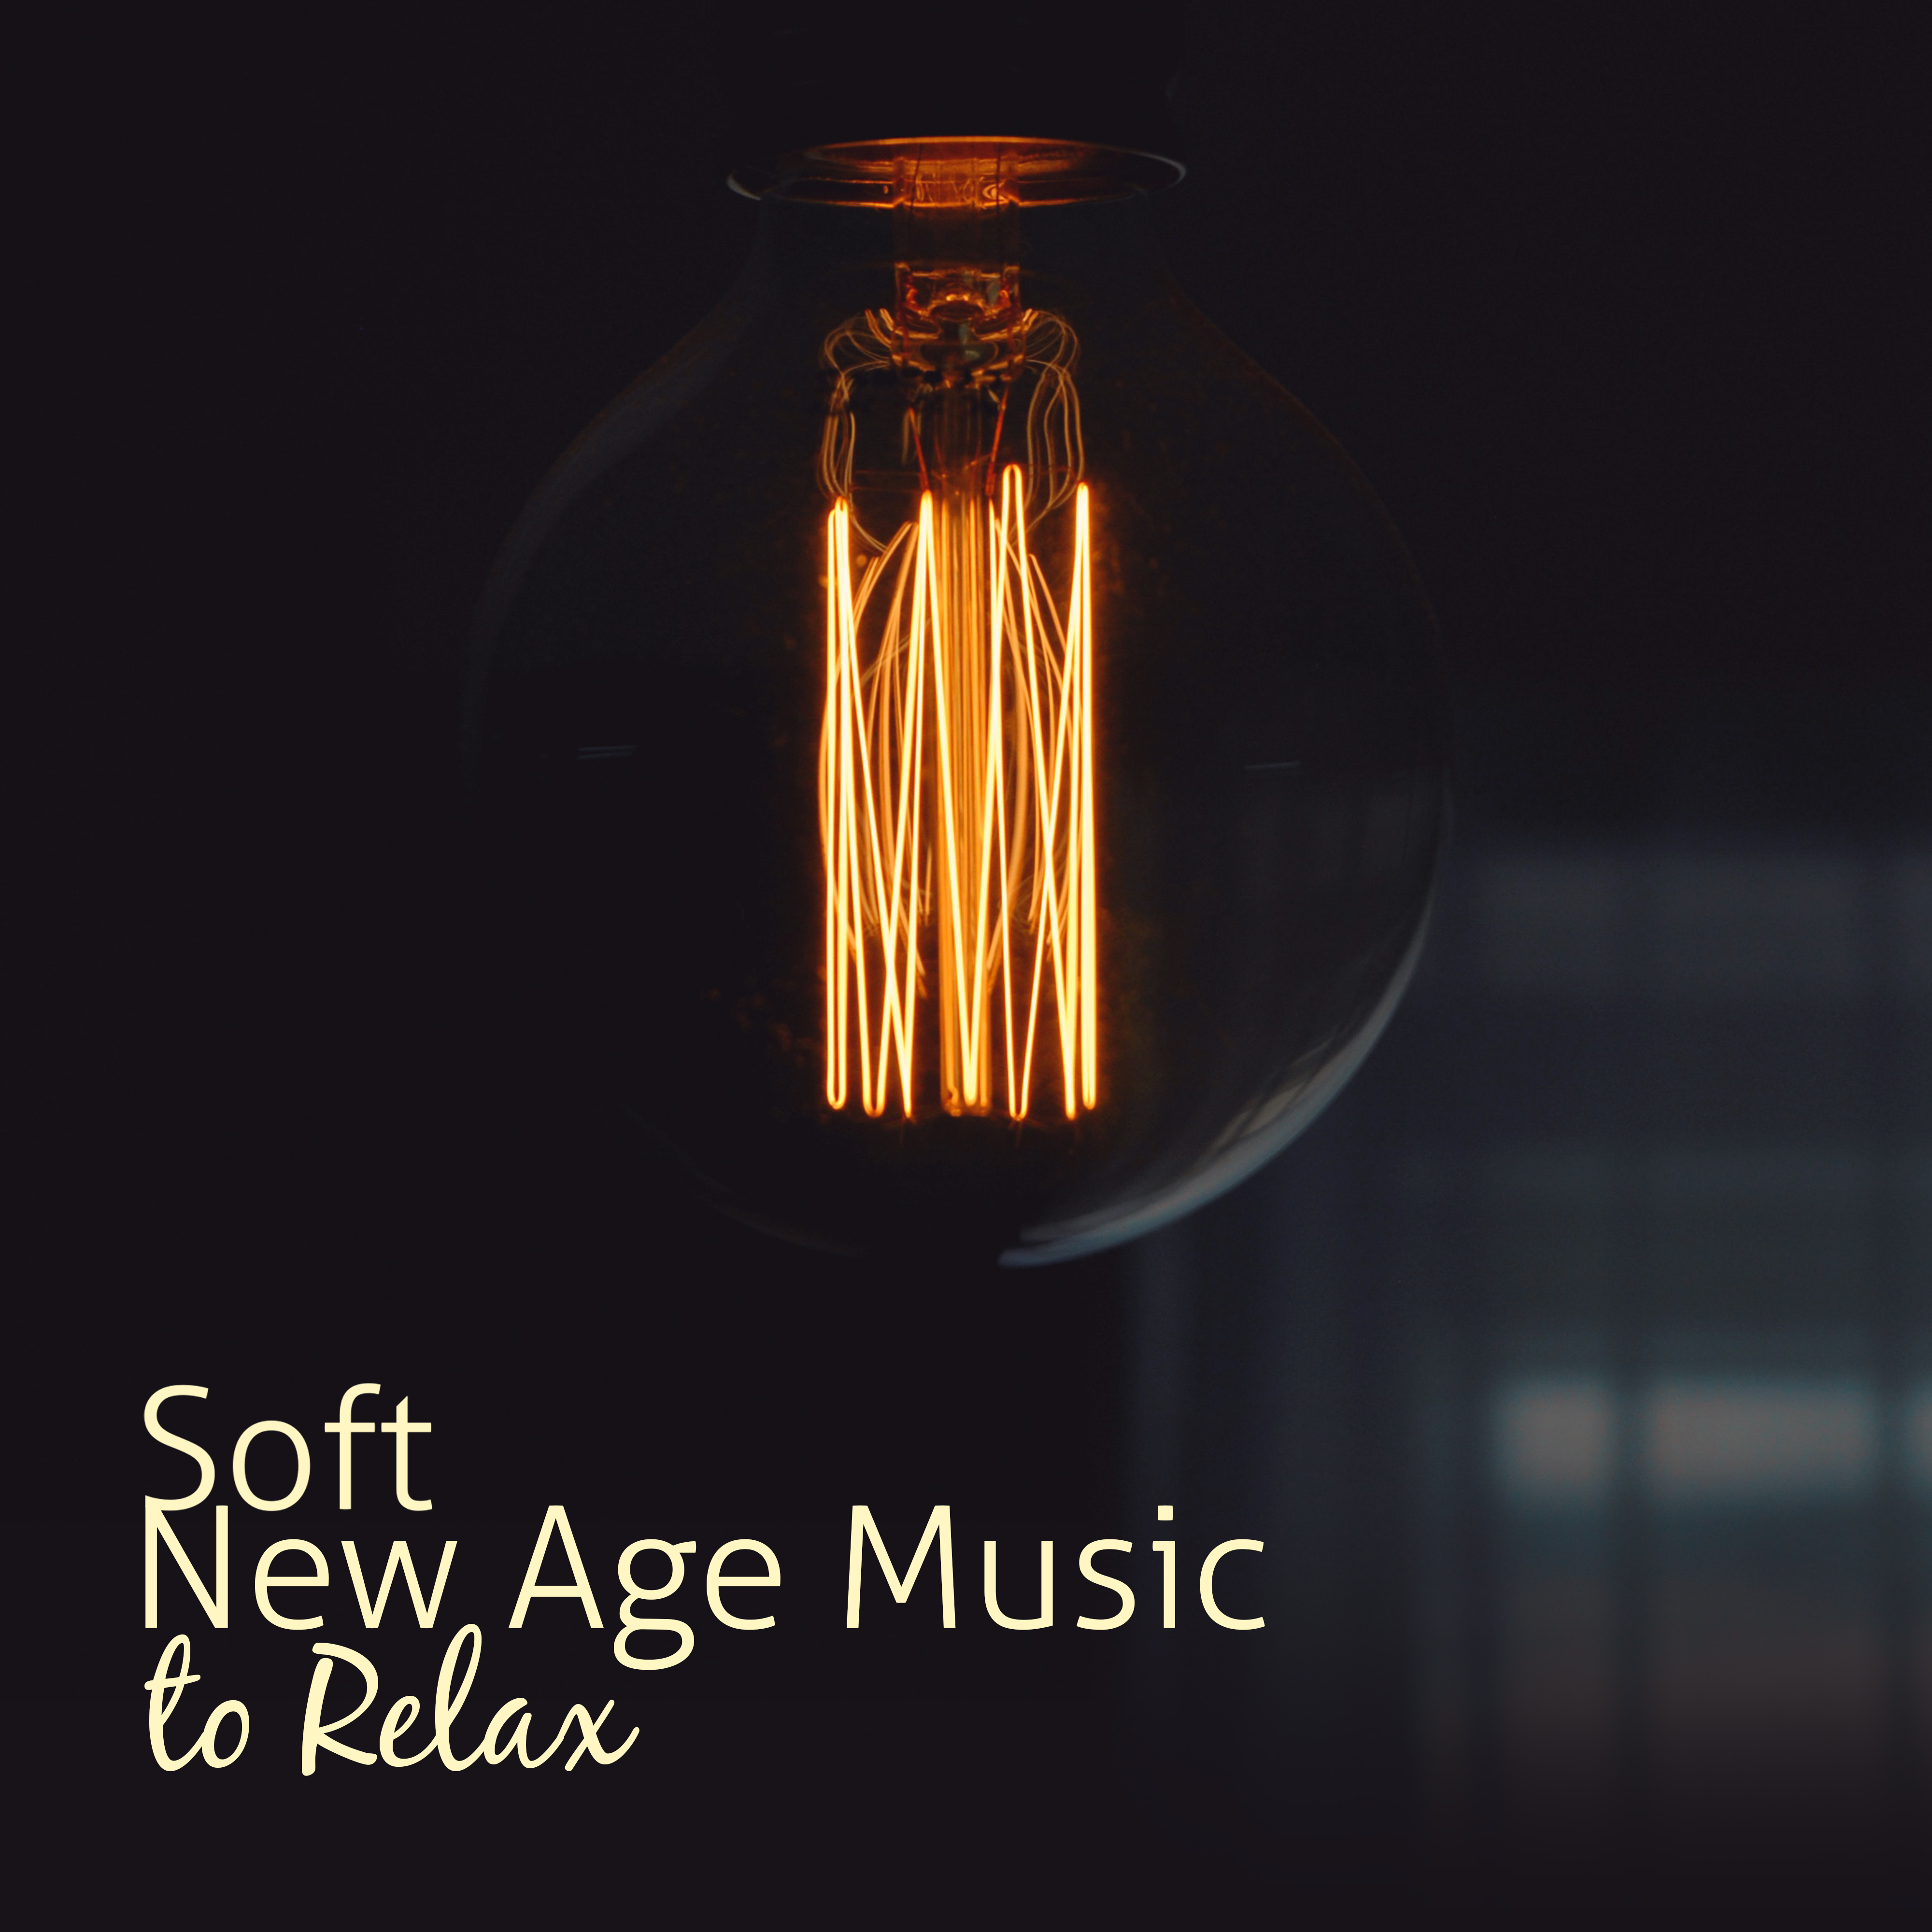 Soft New Age Music to Relax